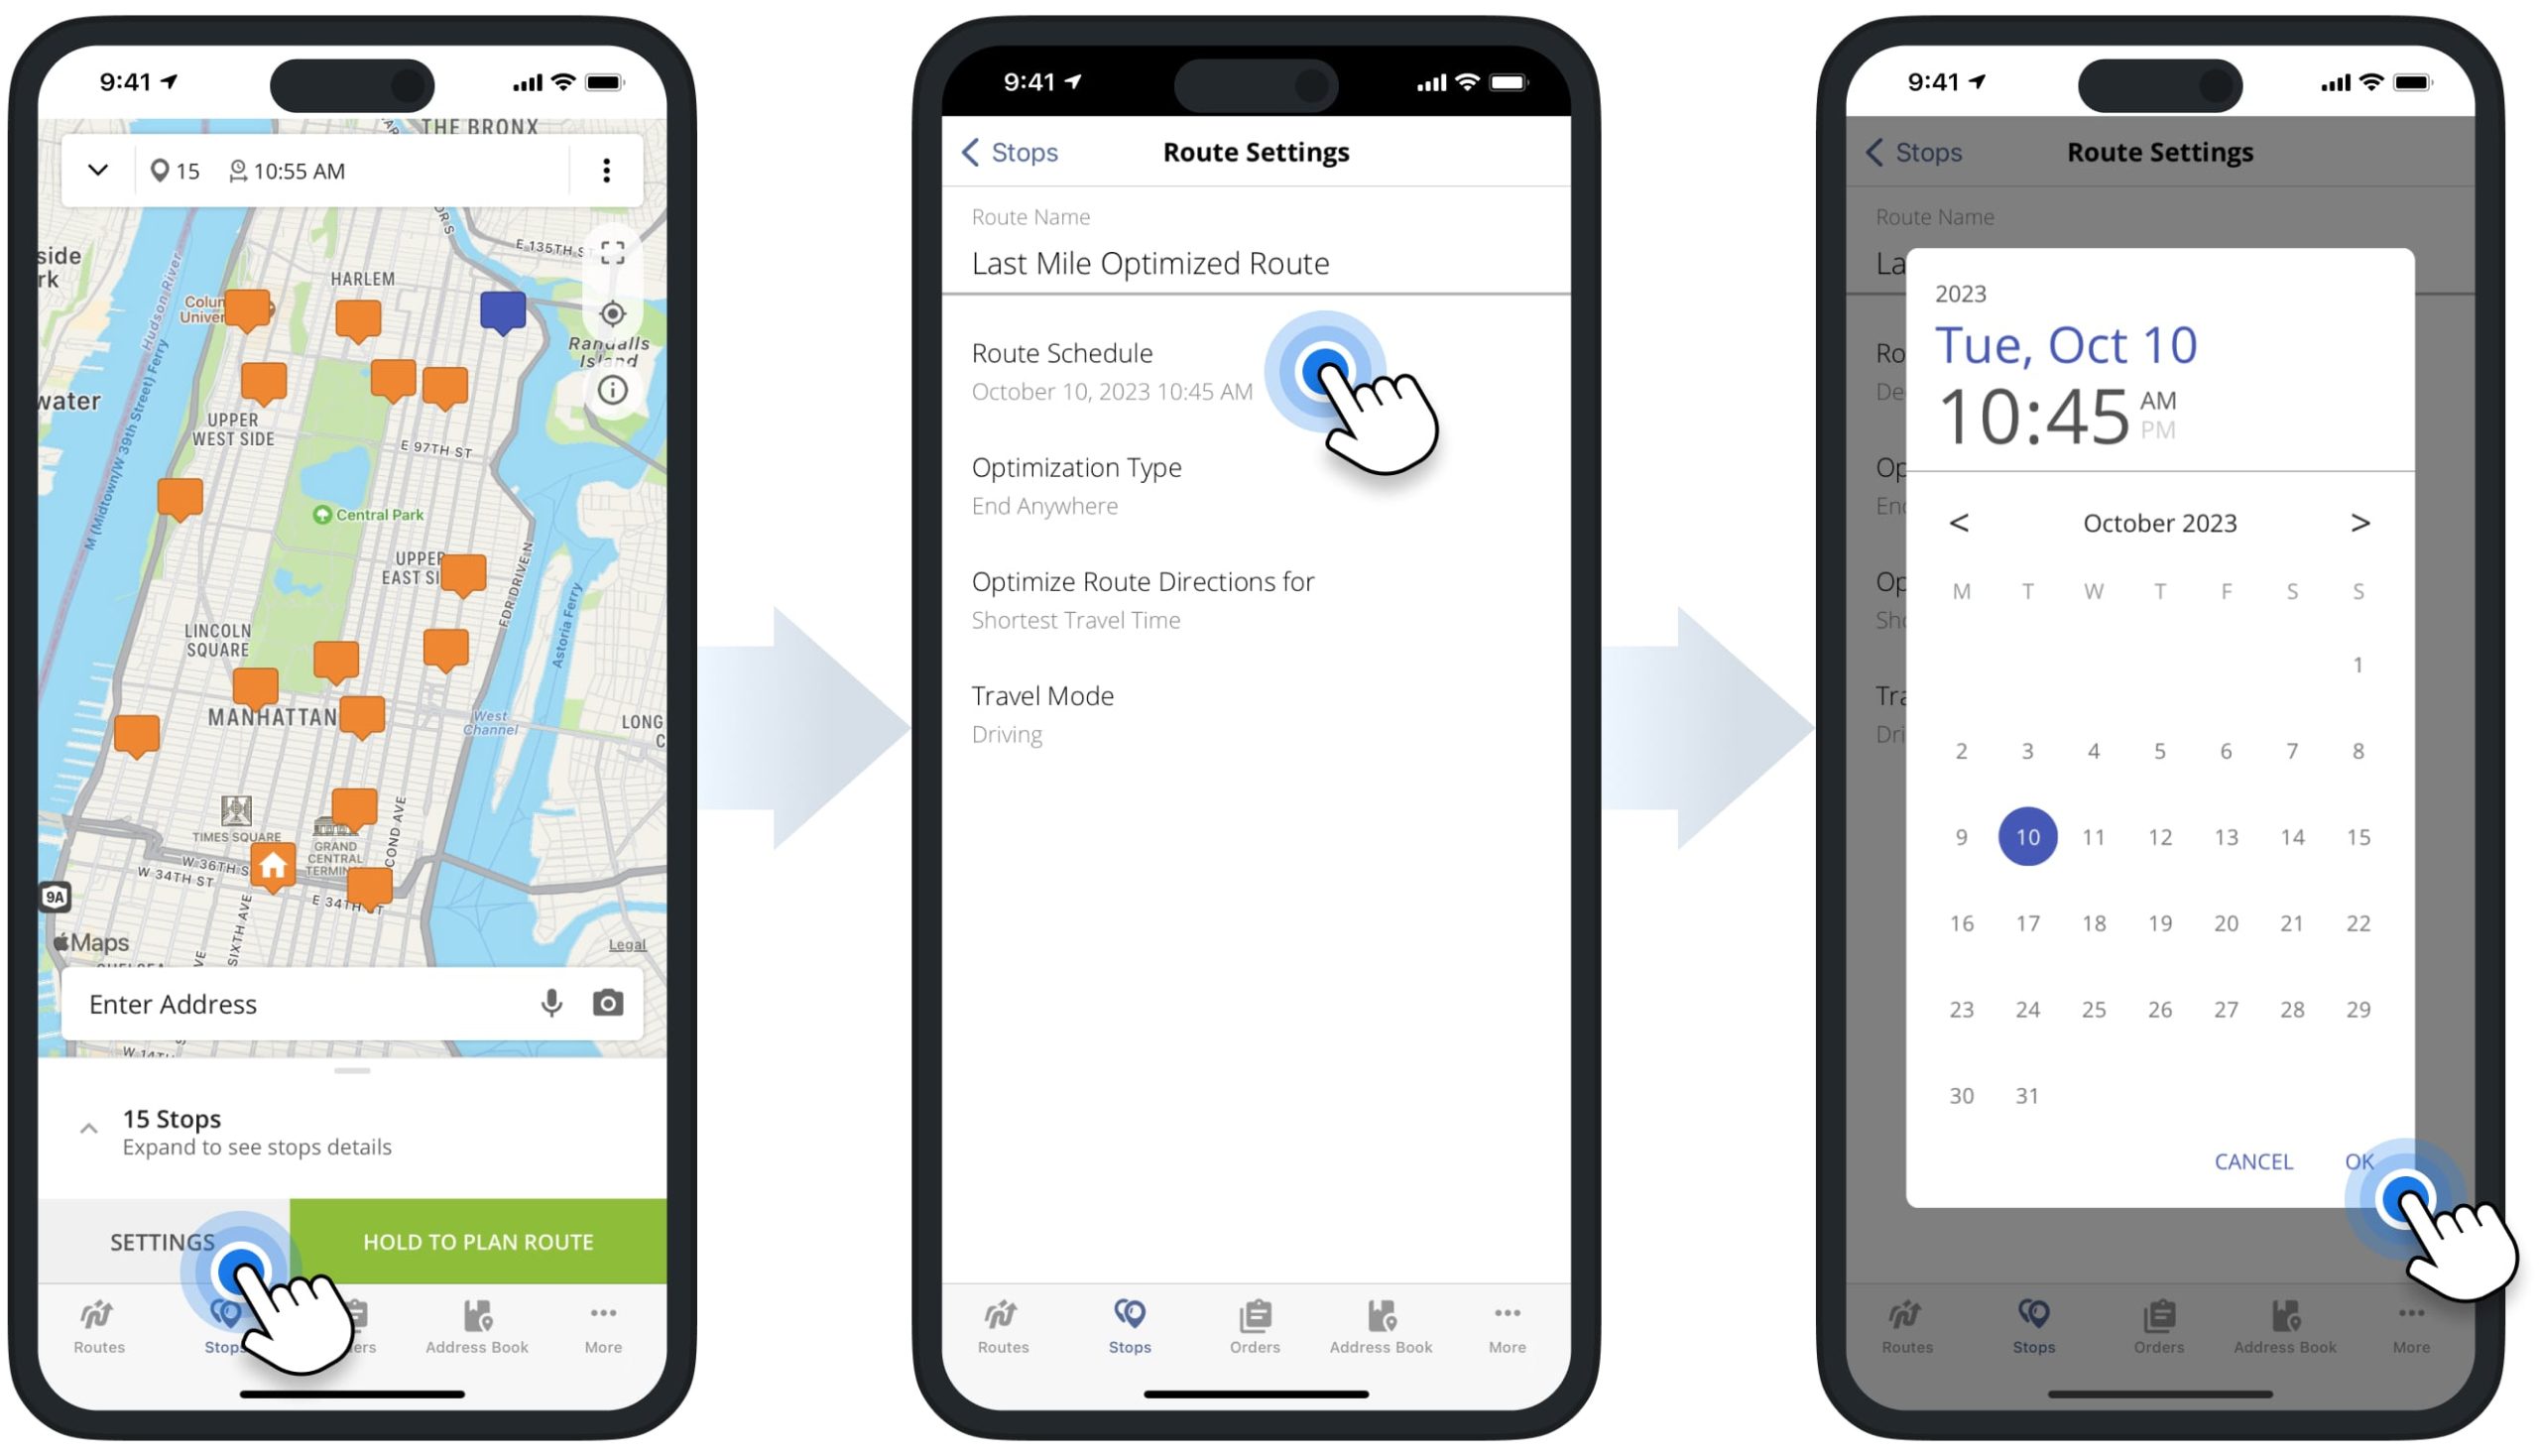 Scheduling multi-stop delivery, pickup, or service routes on the iPhone route planner app.